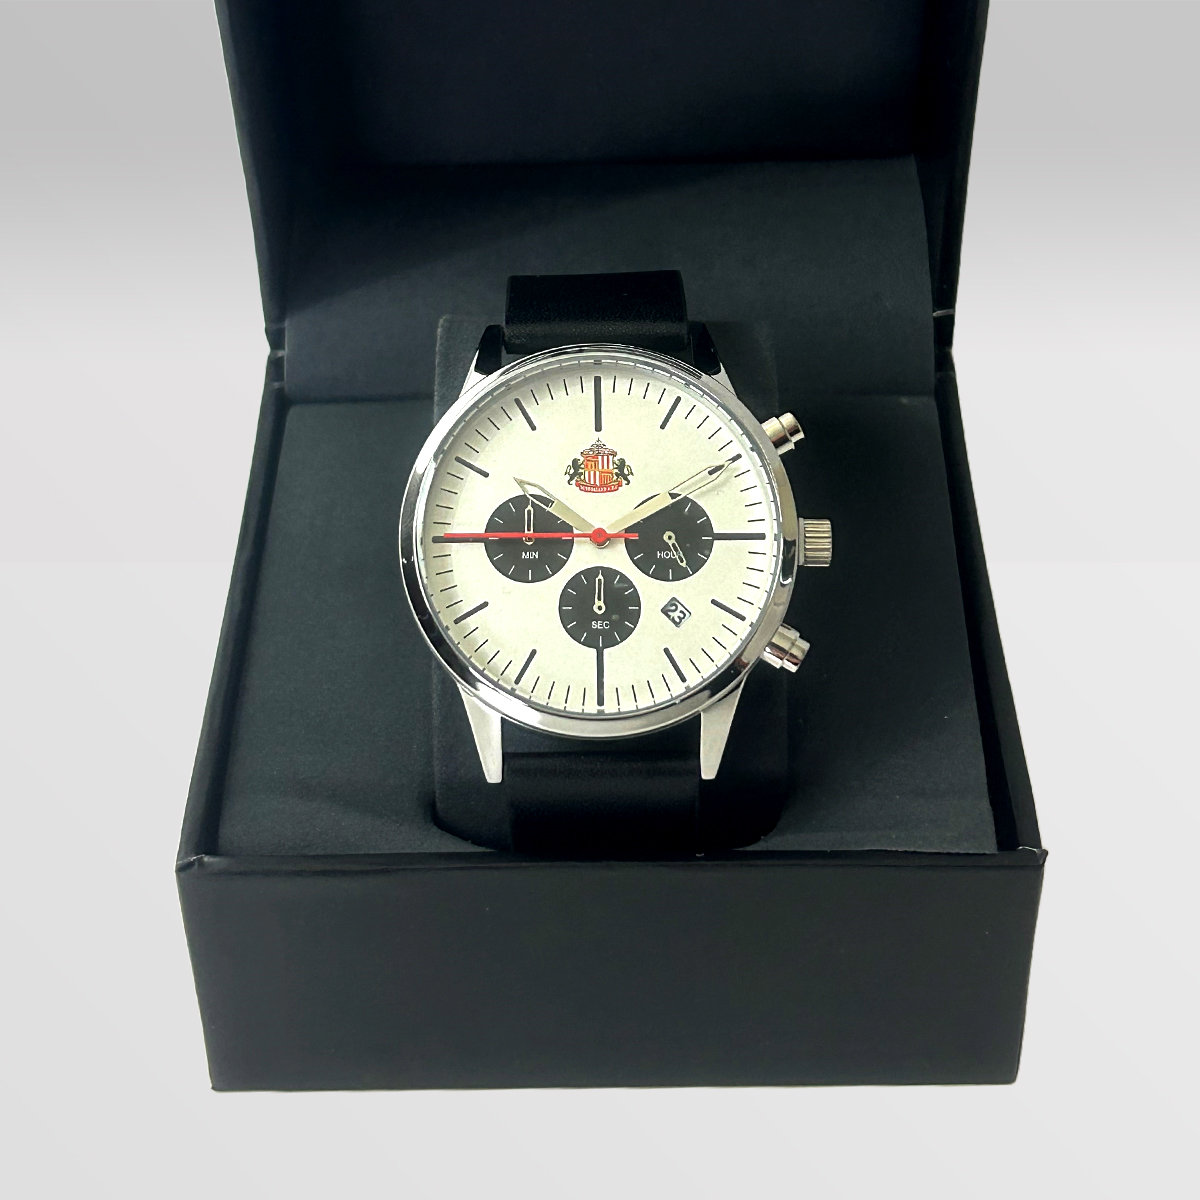 Buy the MULTI DIAL CREST WATCH online at Sunderland AFC Store